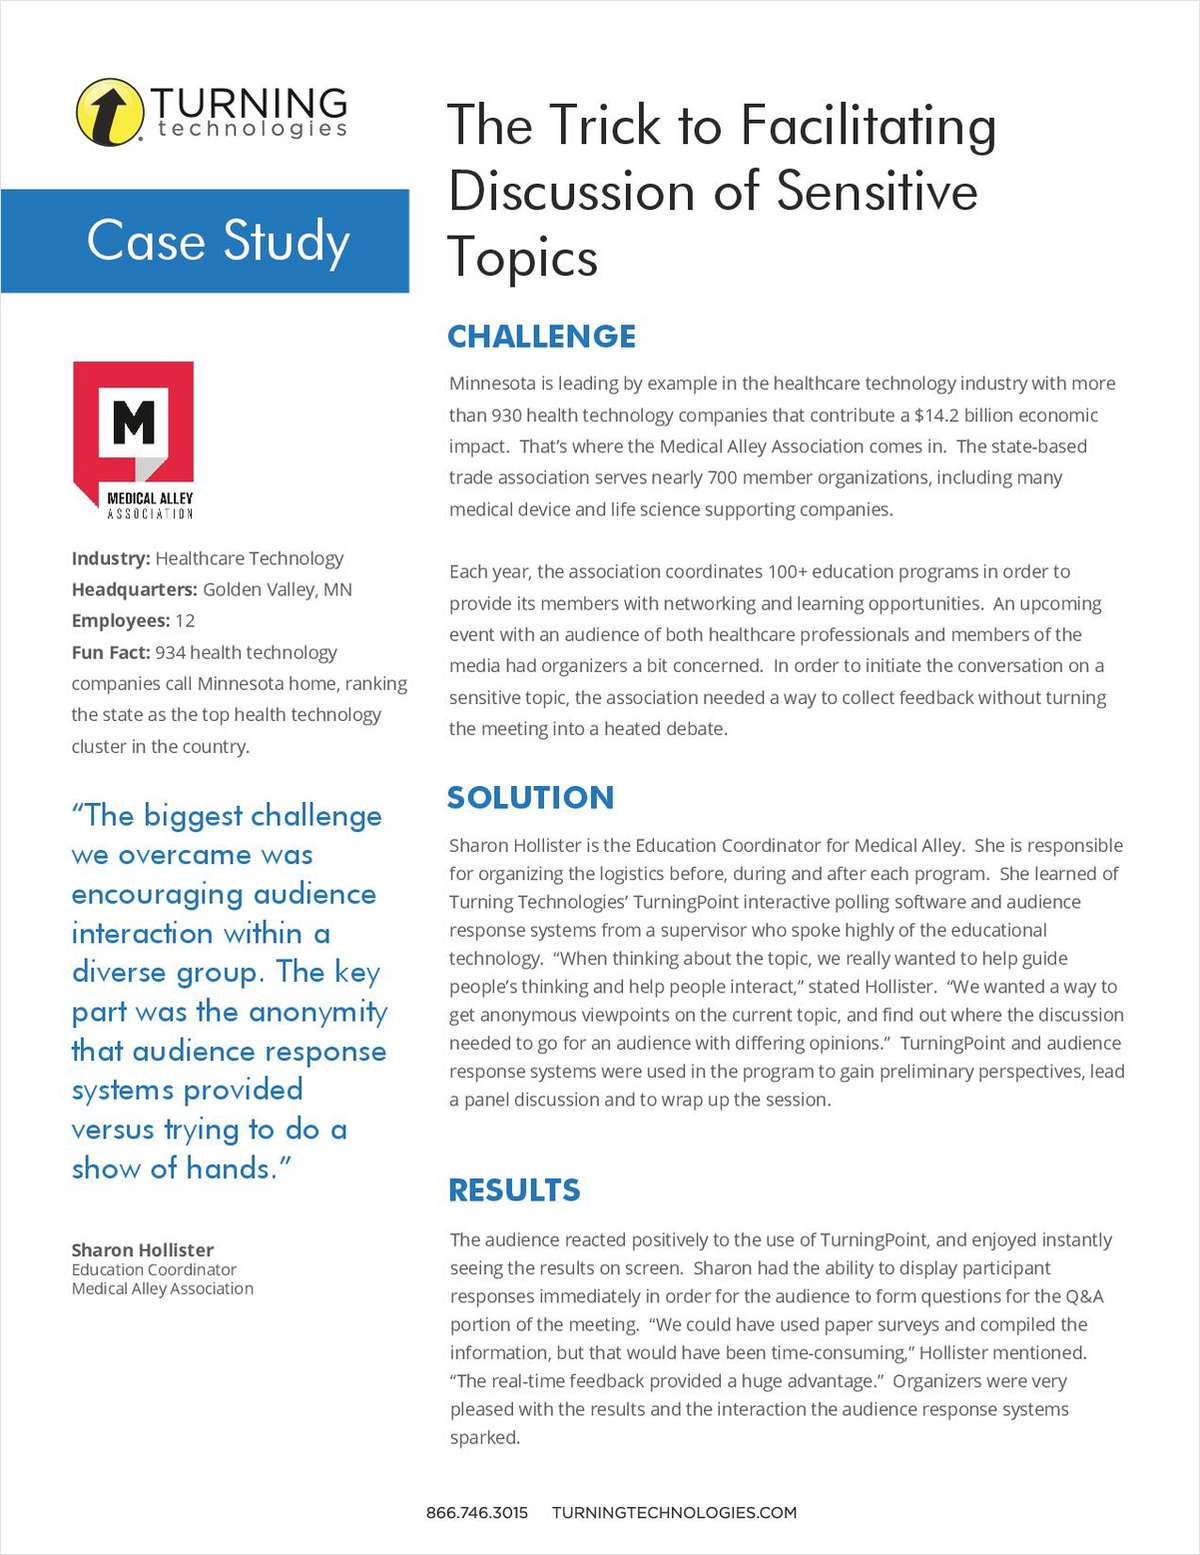 The Trick to Facilitating Discussion of Sensitive Topics